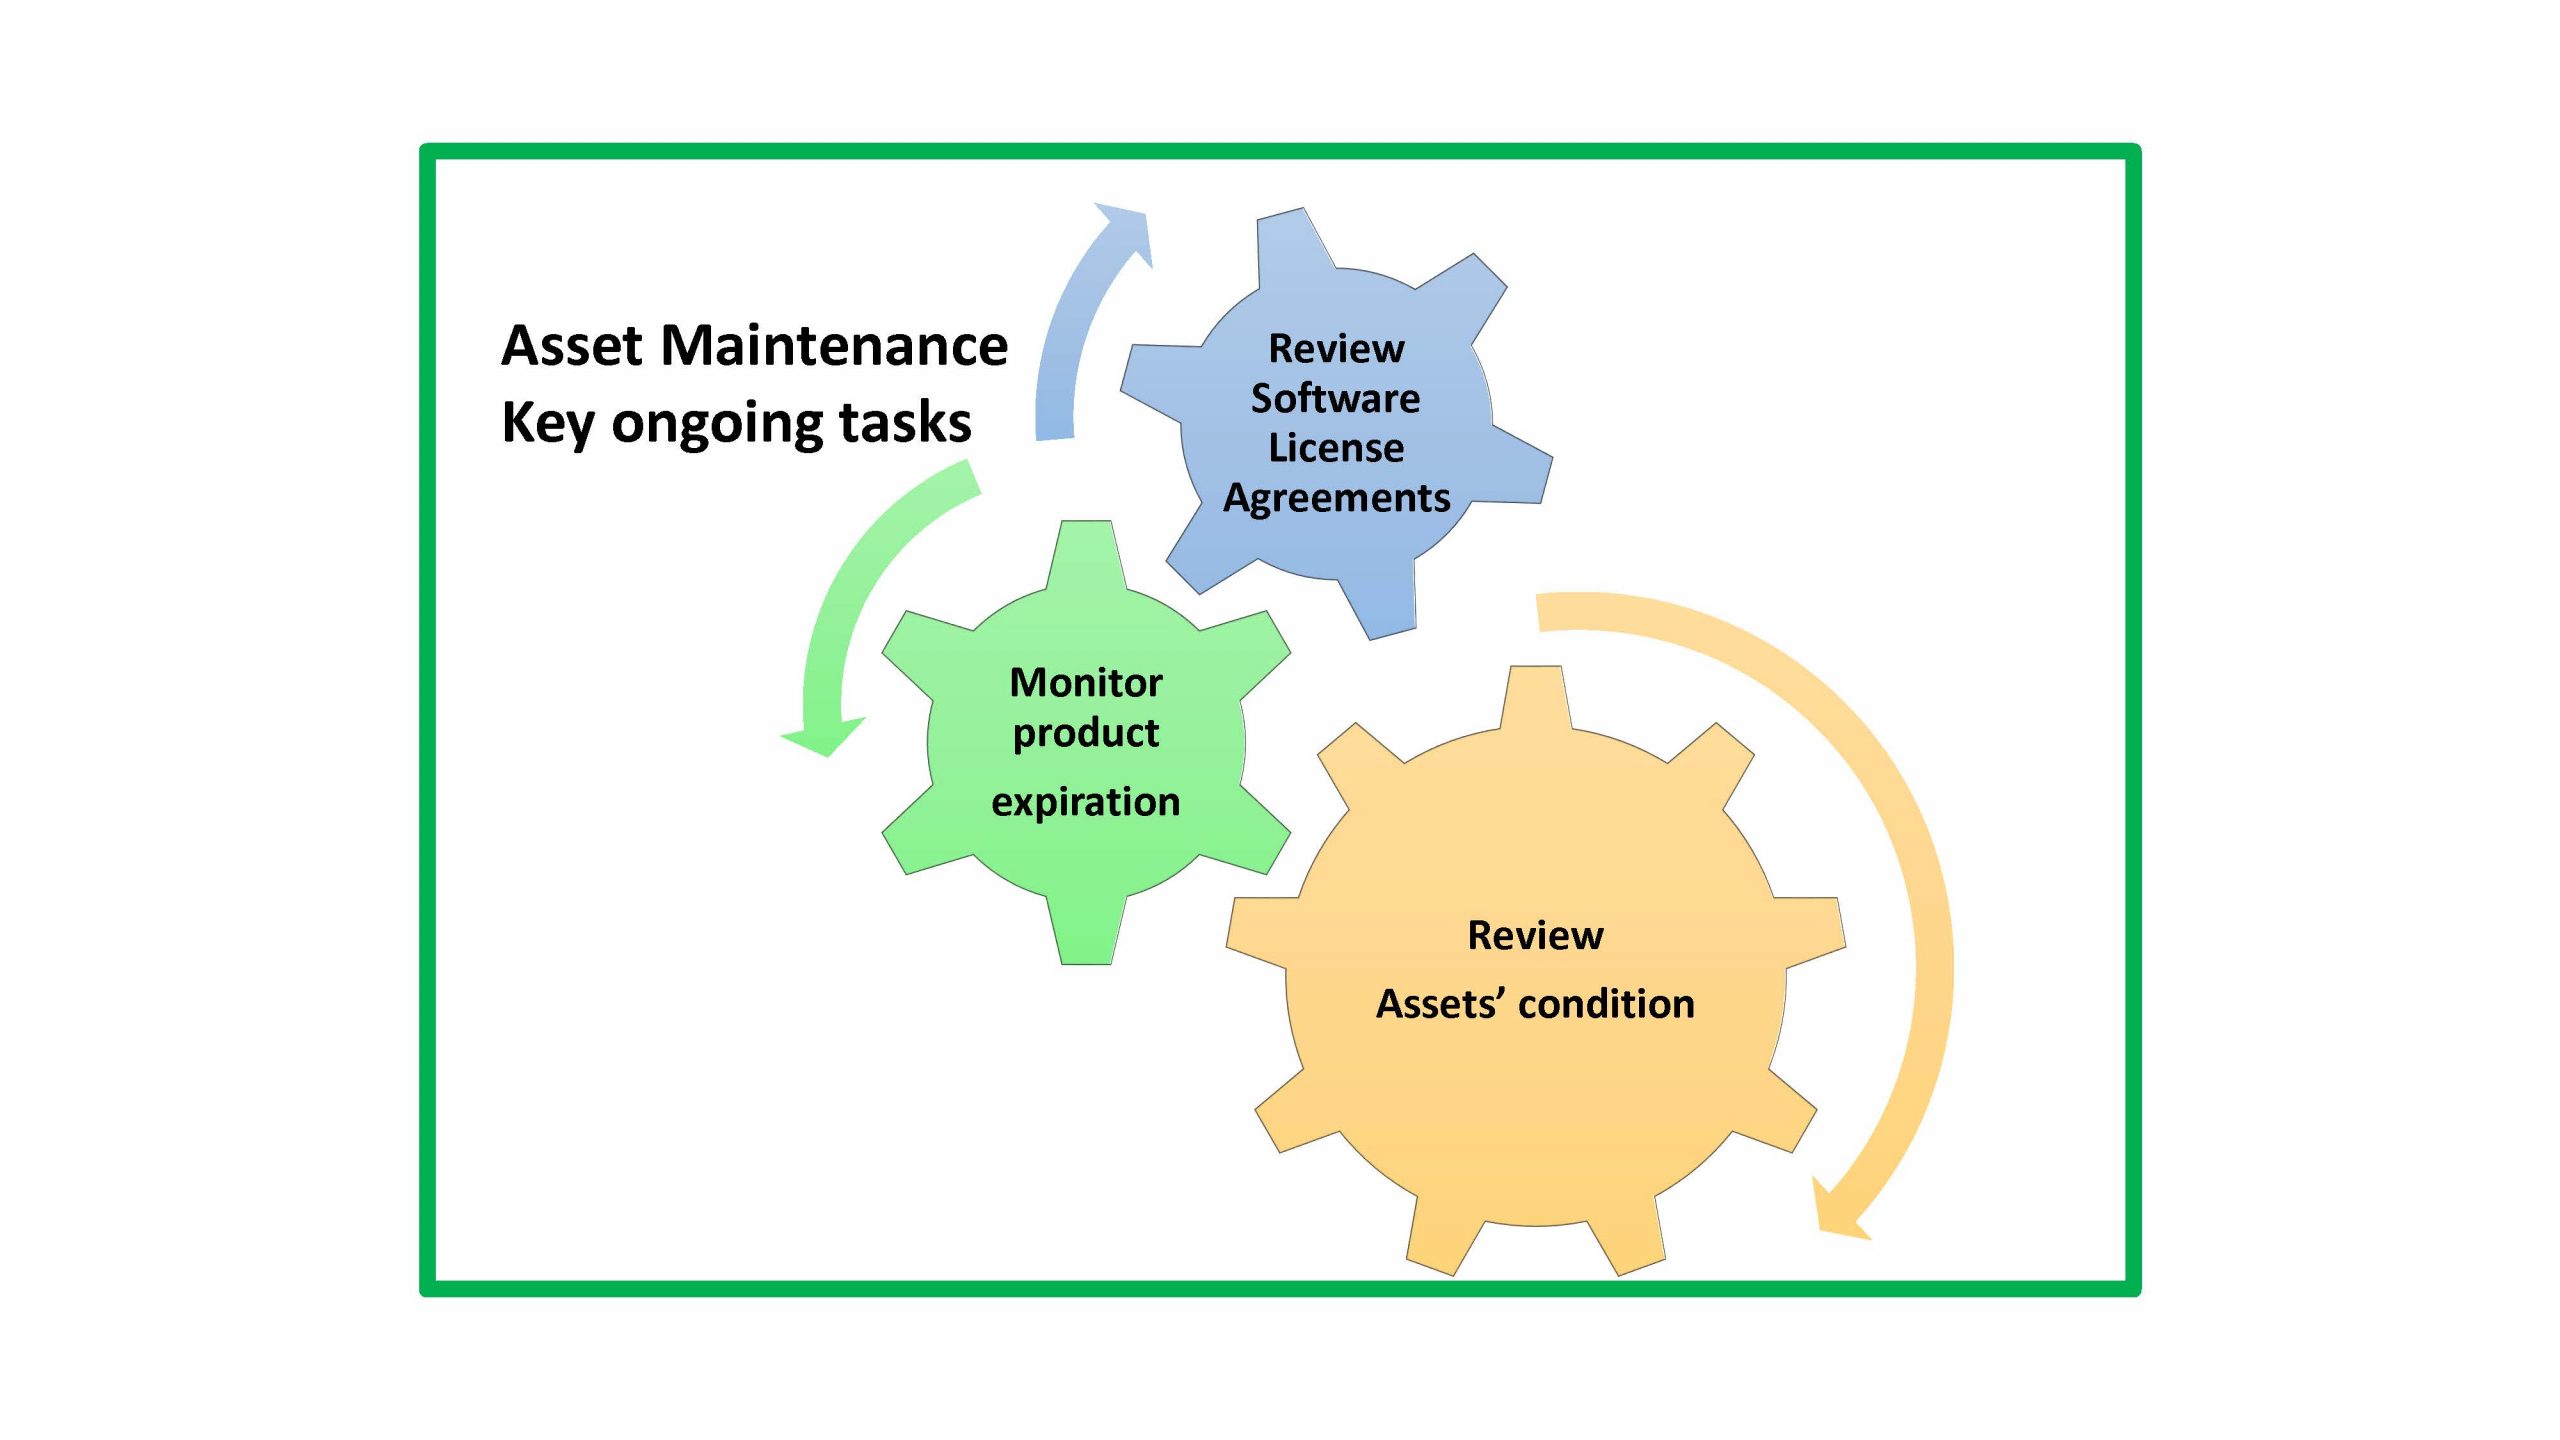 The figure shows phase 5 of asset manaement - maintenance and repair. The three ongoing tasks are reviewing software licence agreements, monitoring produce expirations and reviewing the condition of assets.